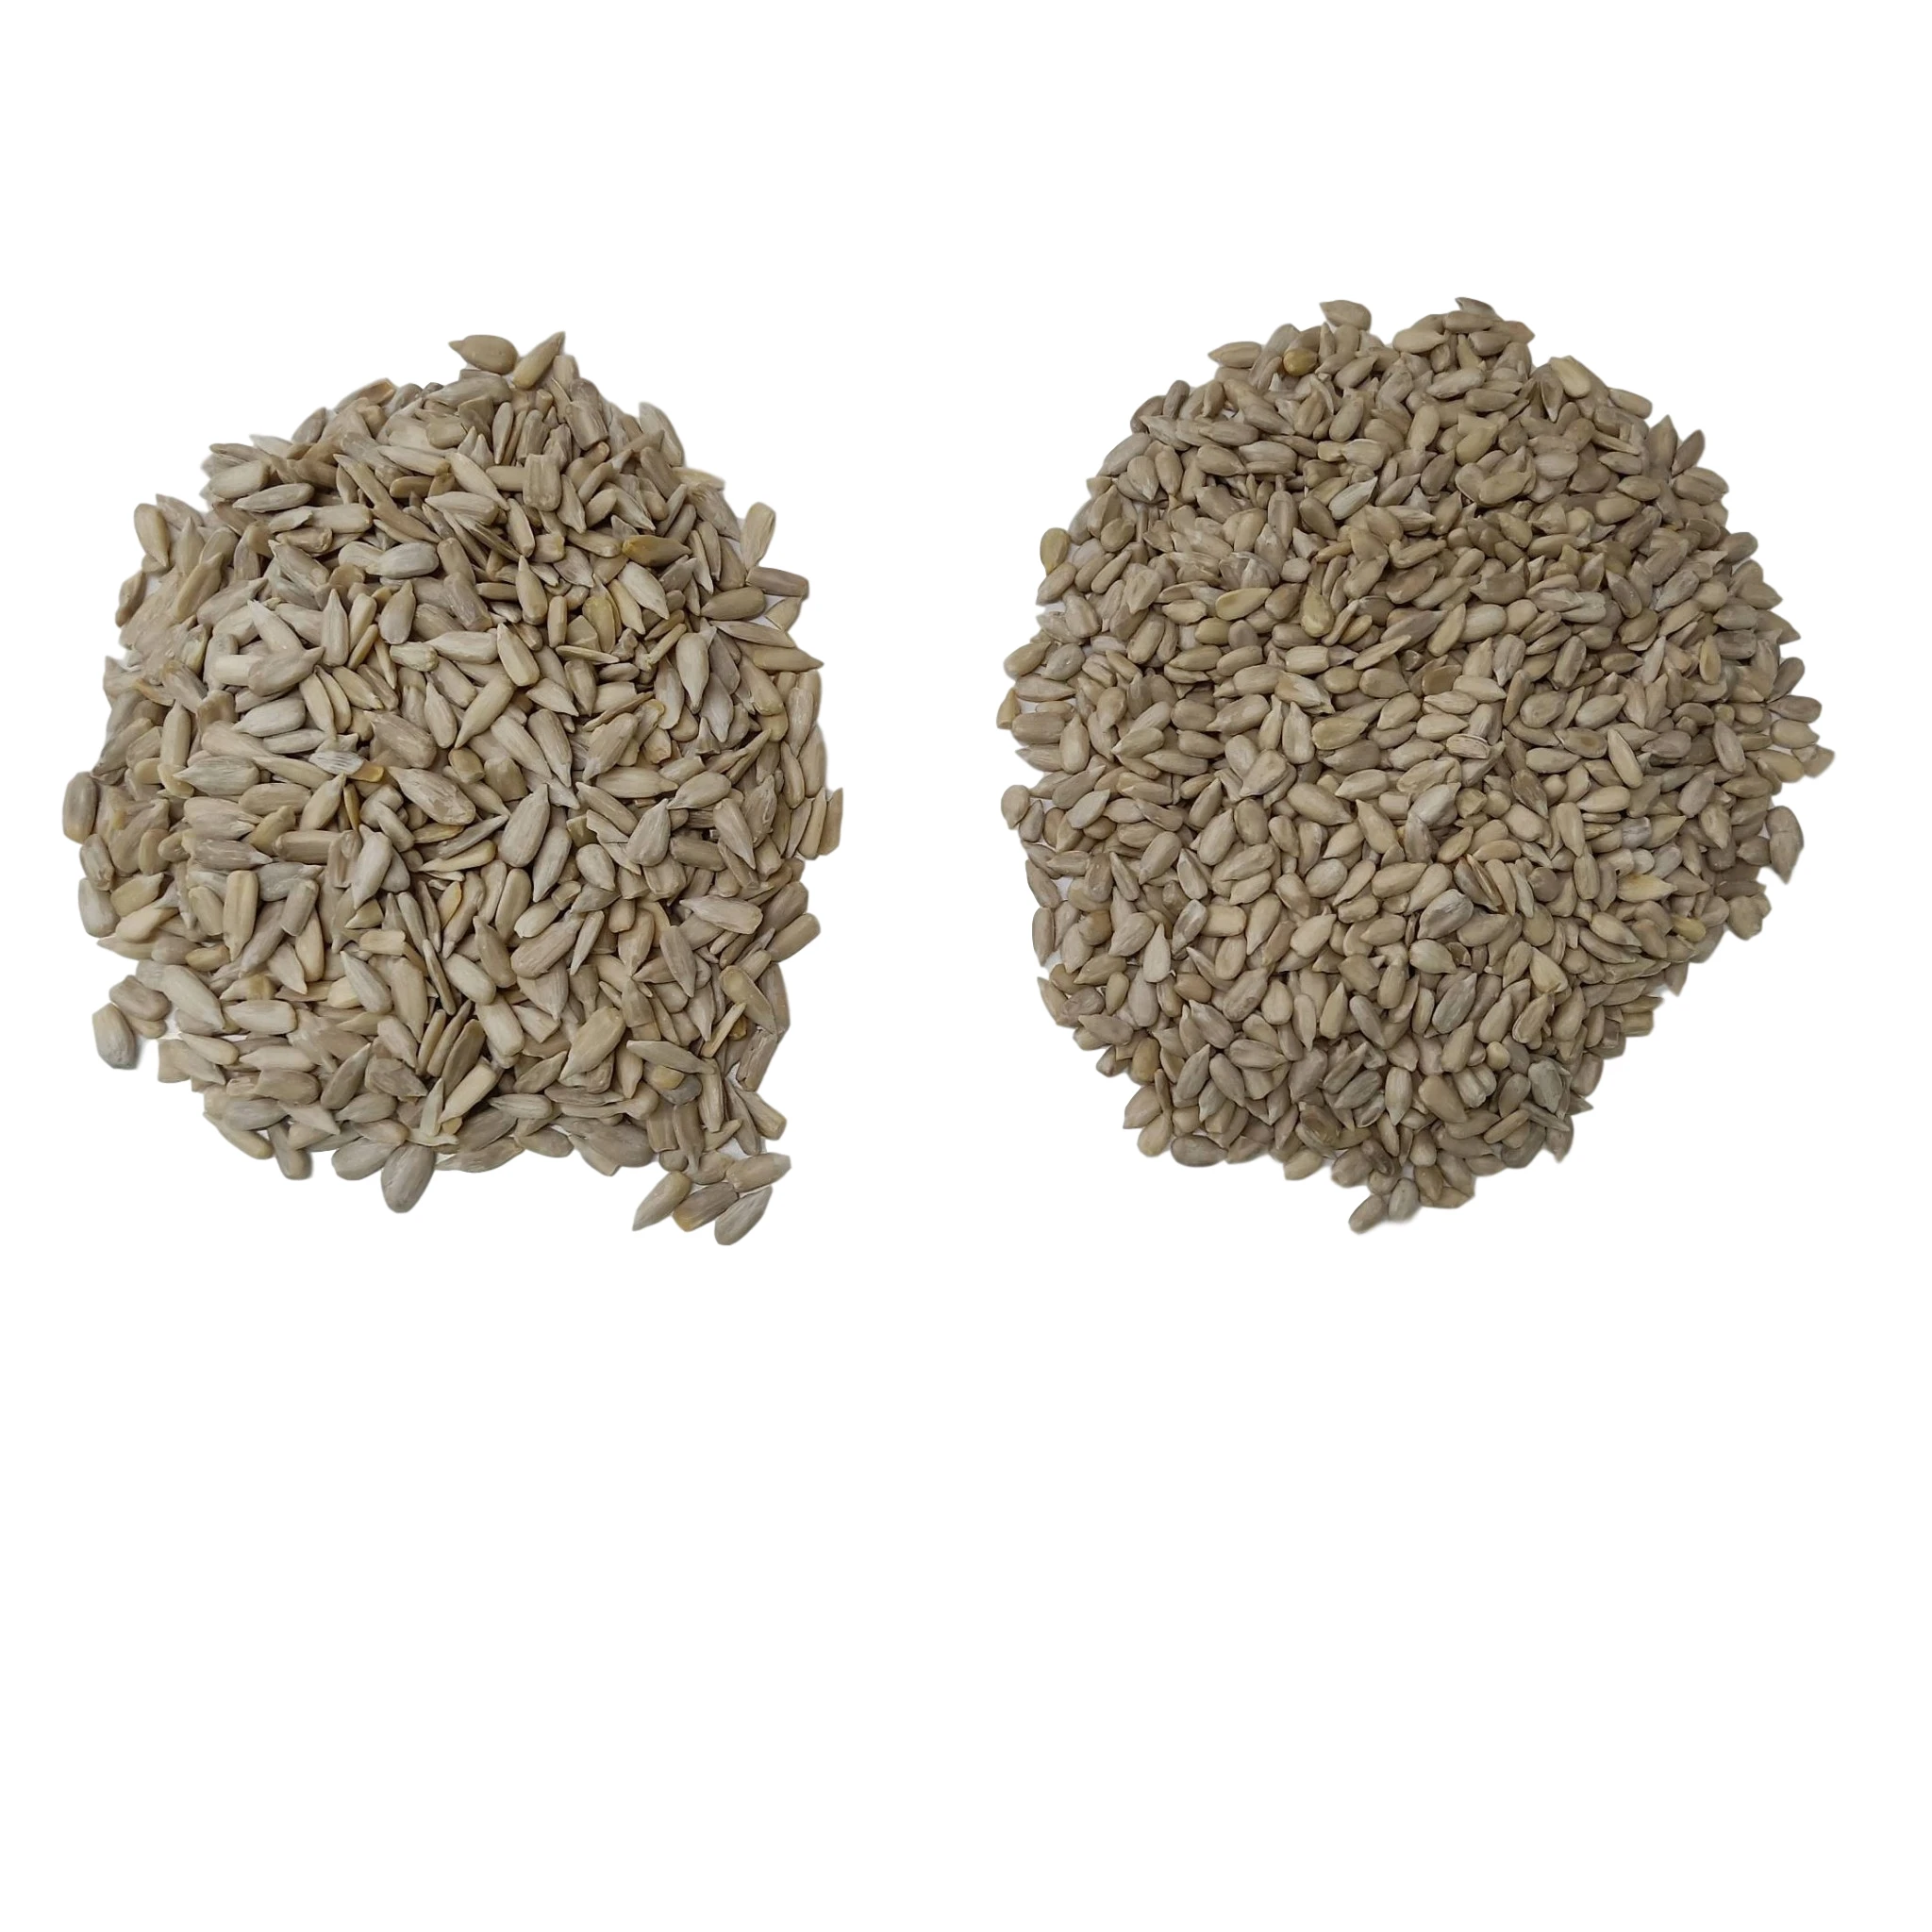 Supplier Top Quality Raw Sunflower Seeds Kernels